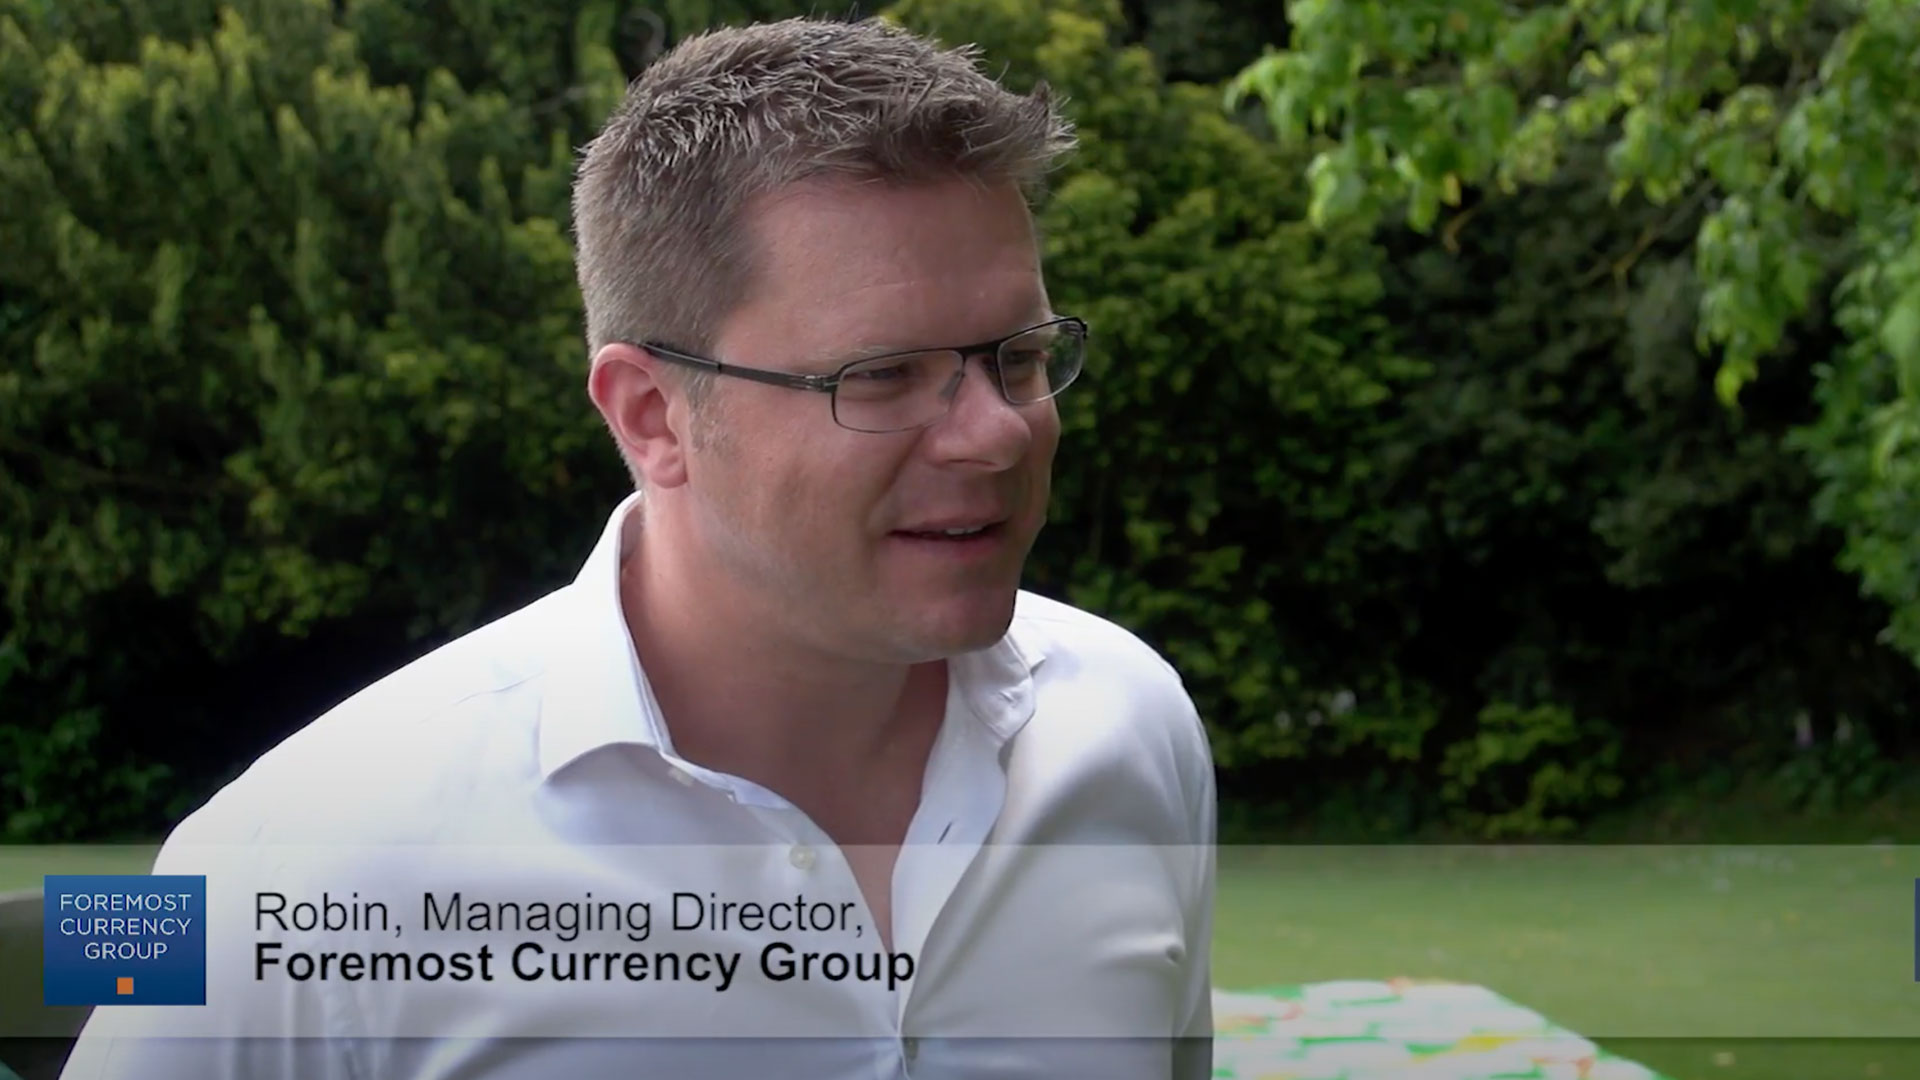 Testimonials for Accountants in Hertfordshire Foremost Currency Group